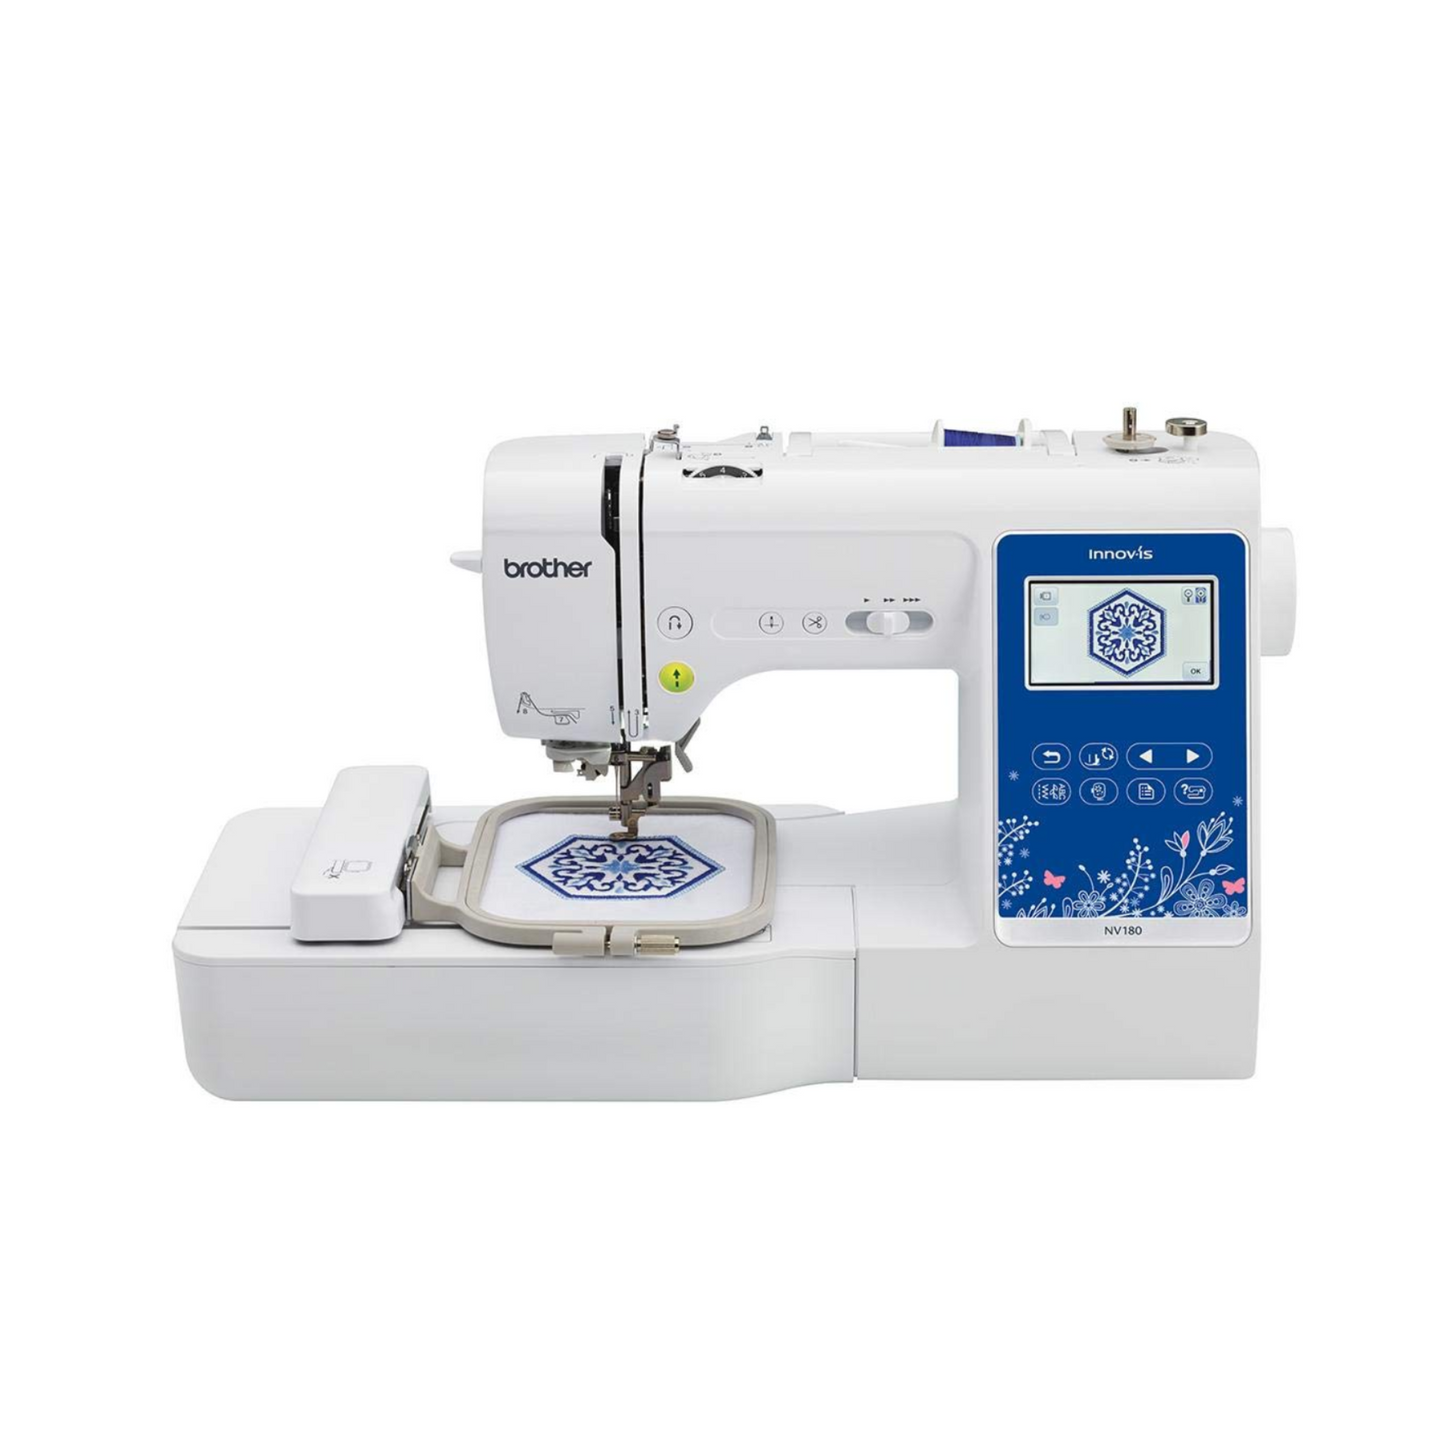 Brother INNOV-IS NV180 - Sewing embroidery machine - White - Front view